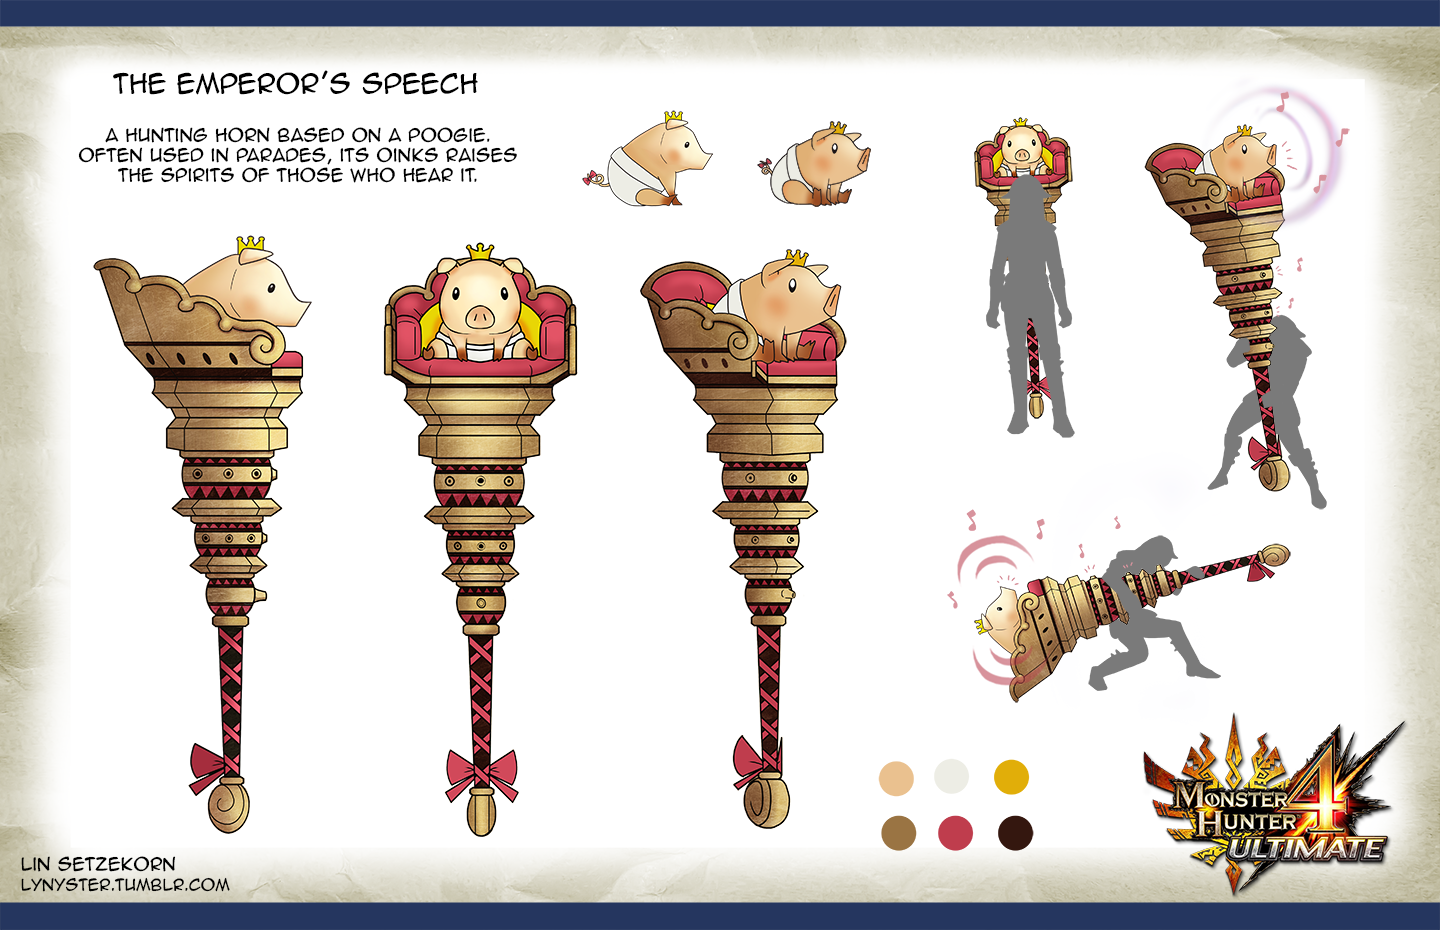 déficit presentar clima Lin (Commissions Closed) on Twitter: "Monster Hunter 4 Ultimate Weapon  Design entry: The Emperor's Speech, which is a Poogie hunting horn!  http://t.co/wxtkEauzEU" / Twitter